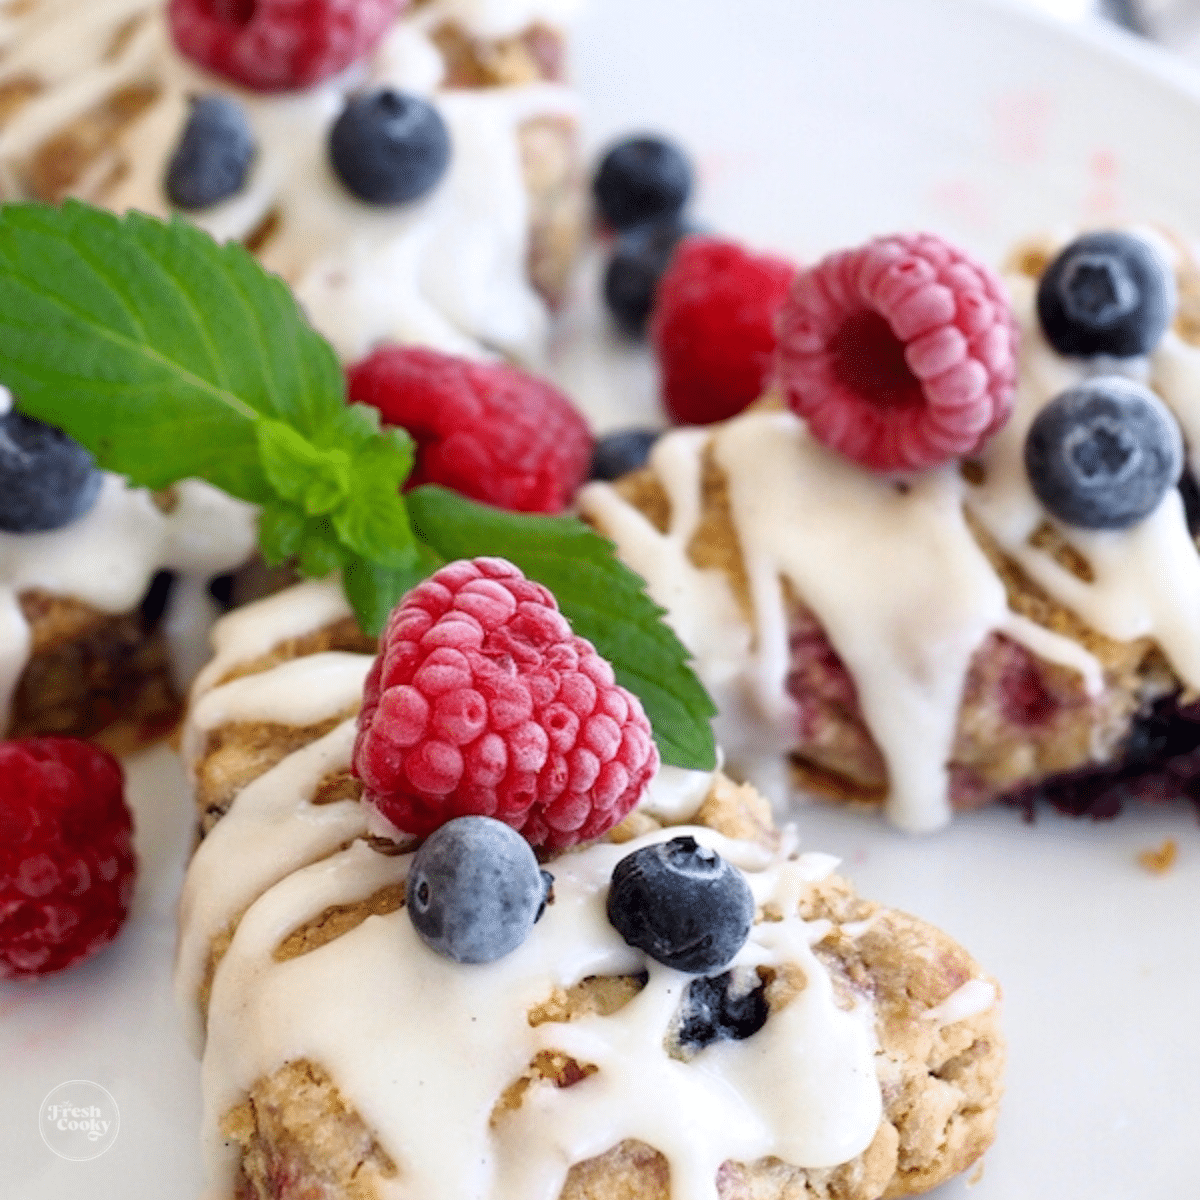 Mixed Berry Scones on a plate with fresh raspberries and blueberries on top, square image.